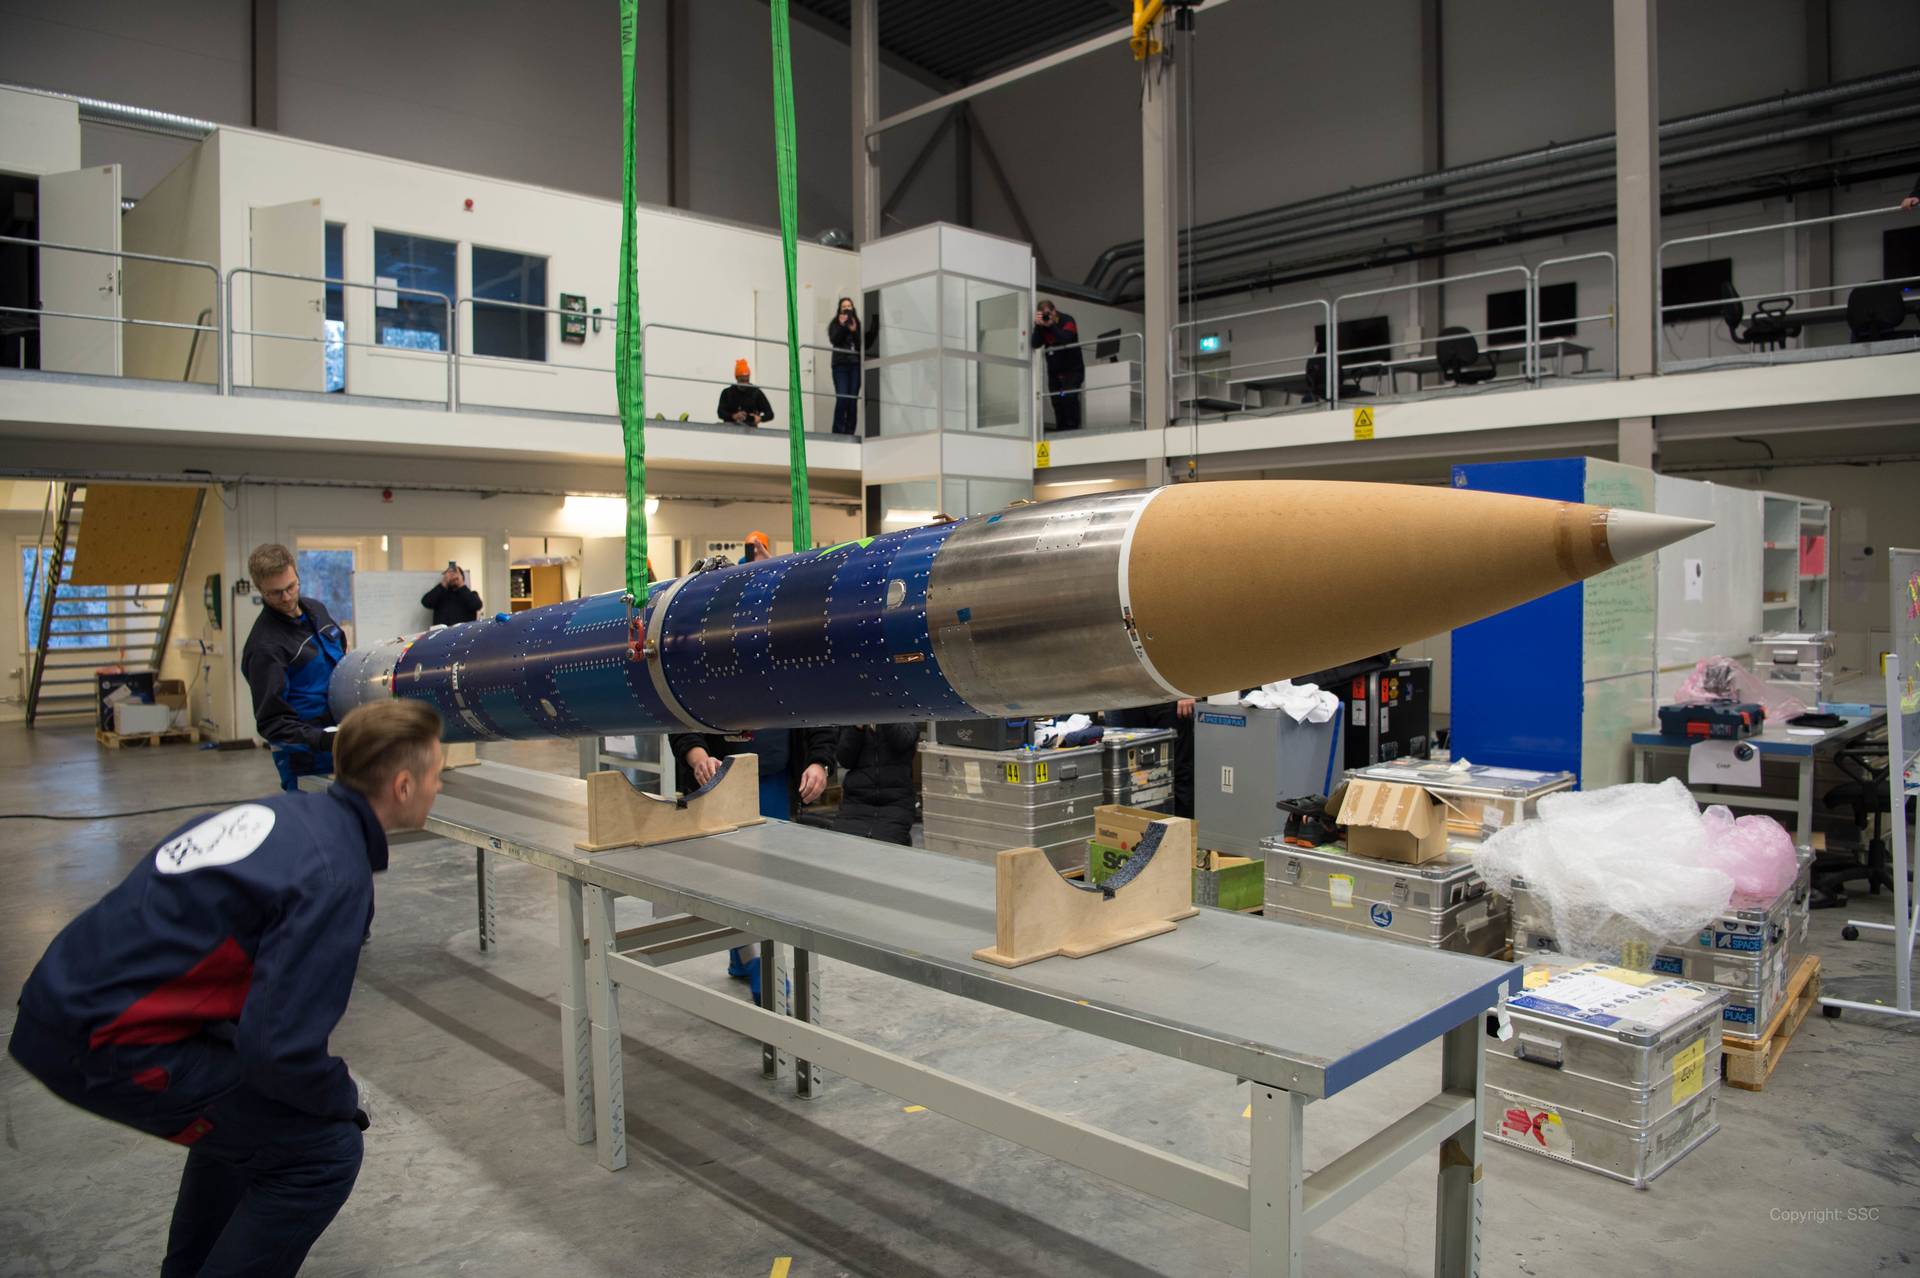 Experiments get six minutes in weightlessness with a Swedish rocket